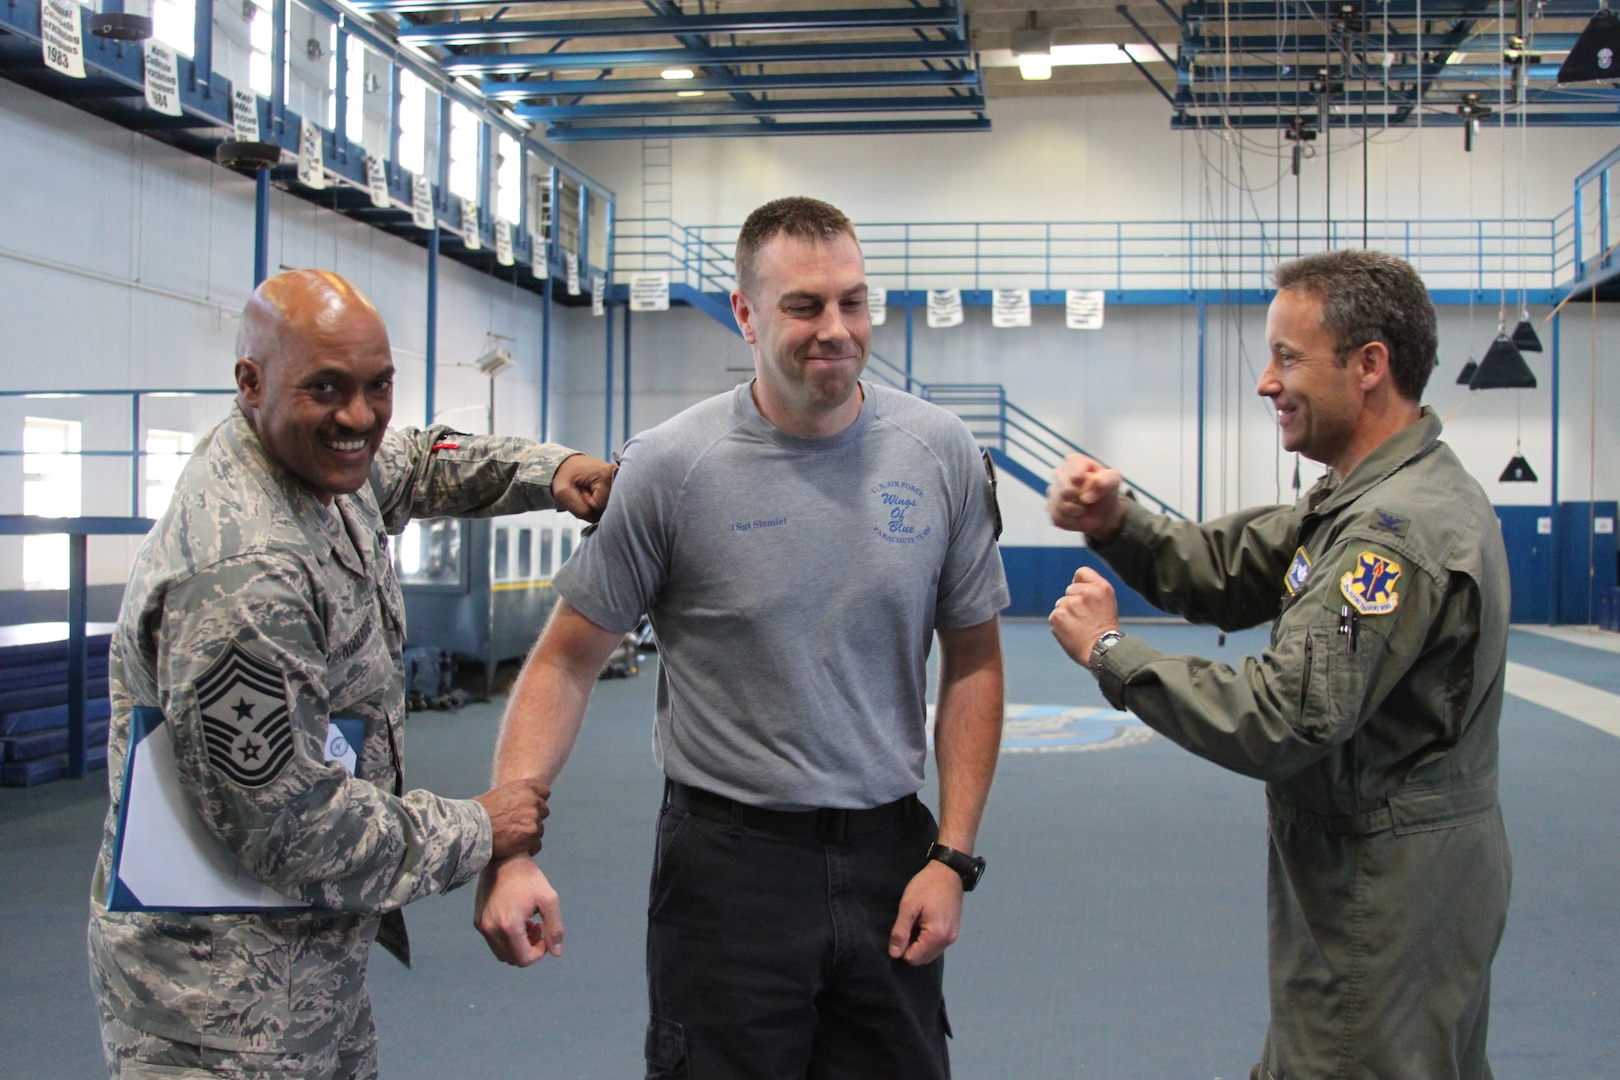 Chief Master Sgt. Avery Woolridge, 12th Flying Training Wing commander chief master sergeant, and Col. Gerald Goodfellow, 12th Flying Training Wing commander, tack on Master Sgt. Dave Siemiet’s master sergeant stripes on June 26, 2013 at the U.S. Air Force Academy, Colo.  Siemiet was selected for the promotion through the Stripes for Exceptional Performers, also known as the STEP program.  (U.S. Air Force photo by Tech. Sgt. JT Valente)